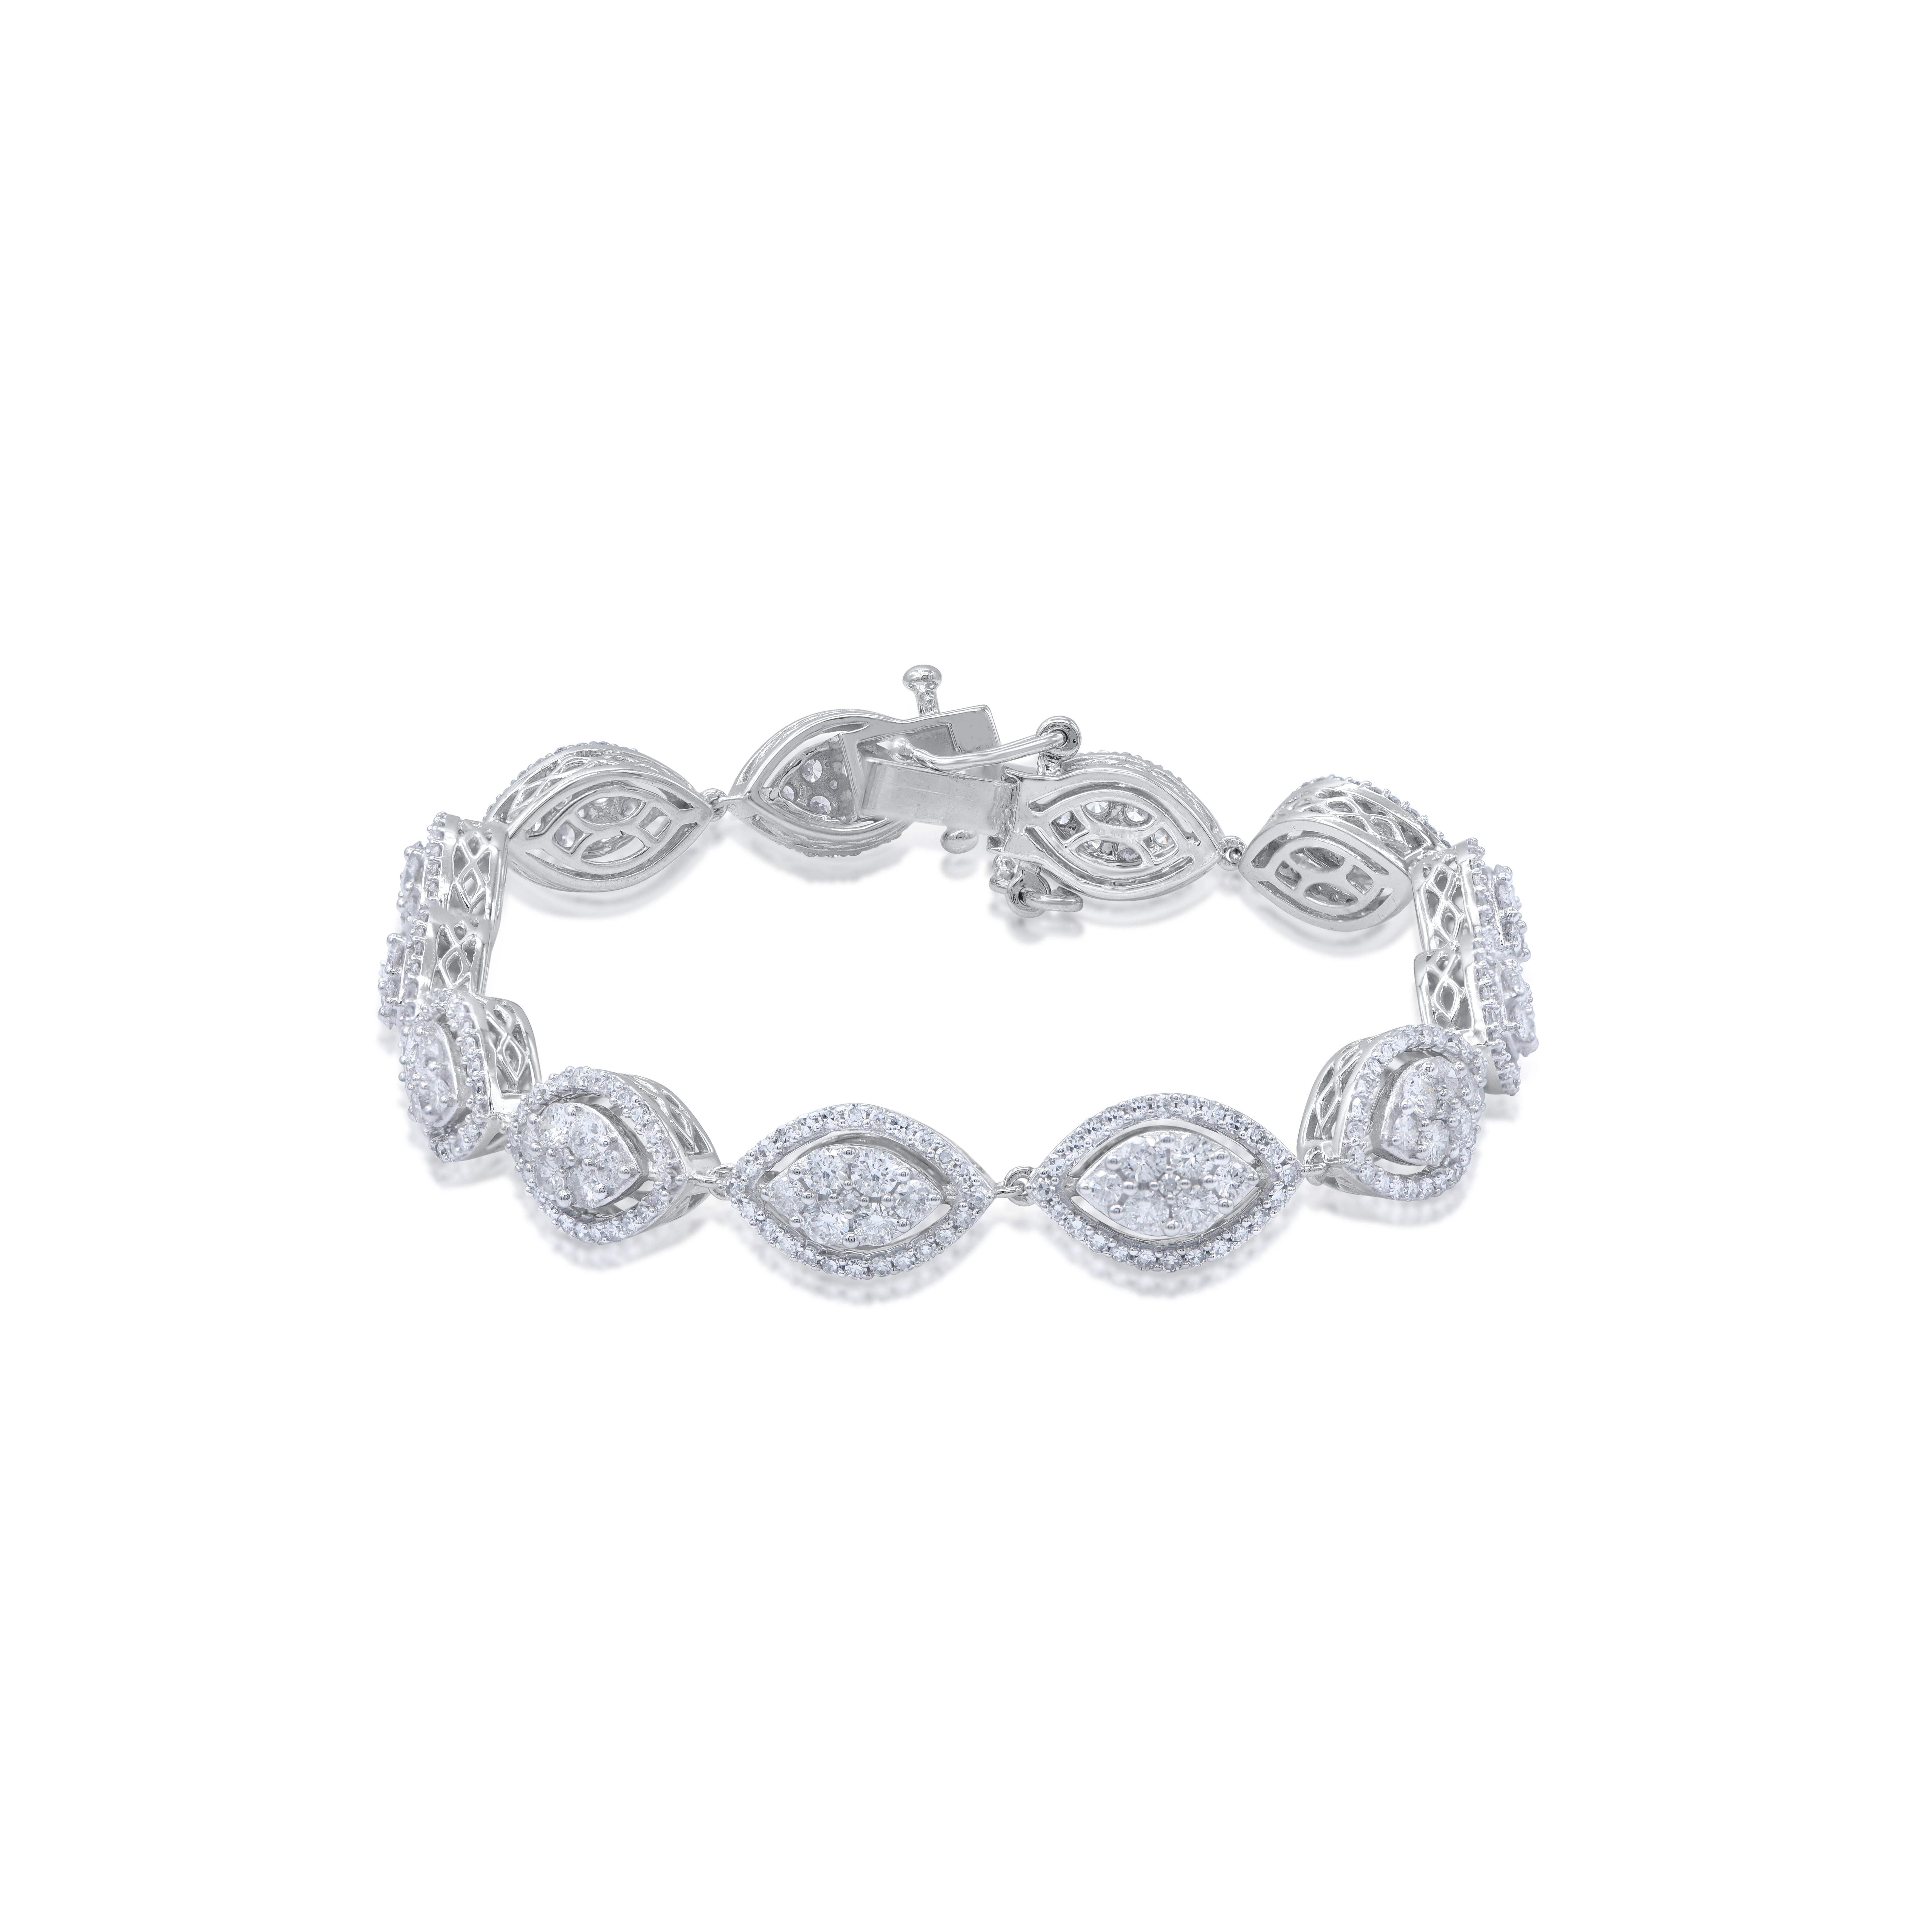 Buffed to a brilliant luster, this eye-catching diamond bangle secures comfortably with box clasp. Studded with 403 round-cut diamonds and set in 14 KT , and the diamonds are graded H-I Color, I2 Clarity. The perfect accessory to glam up your